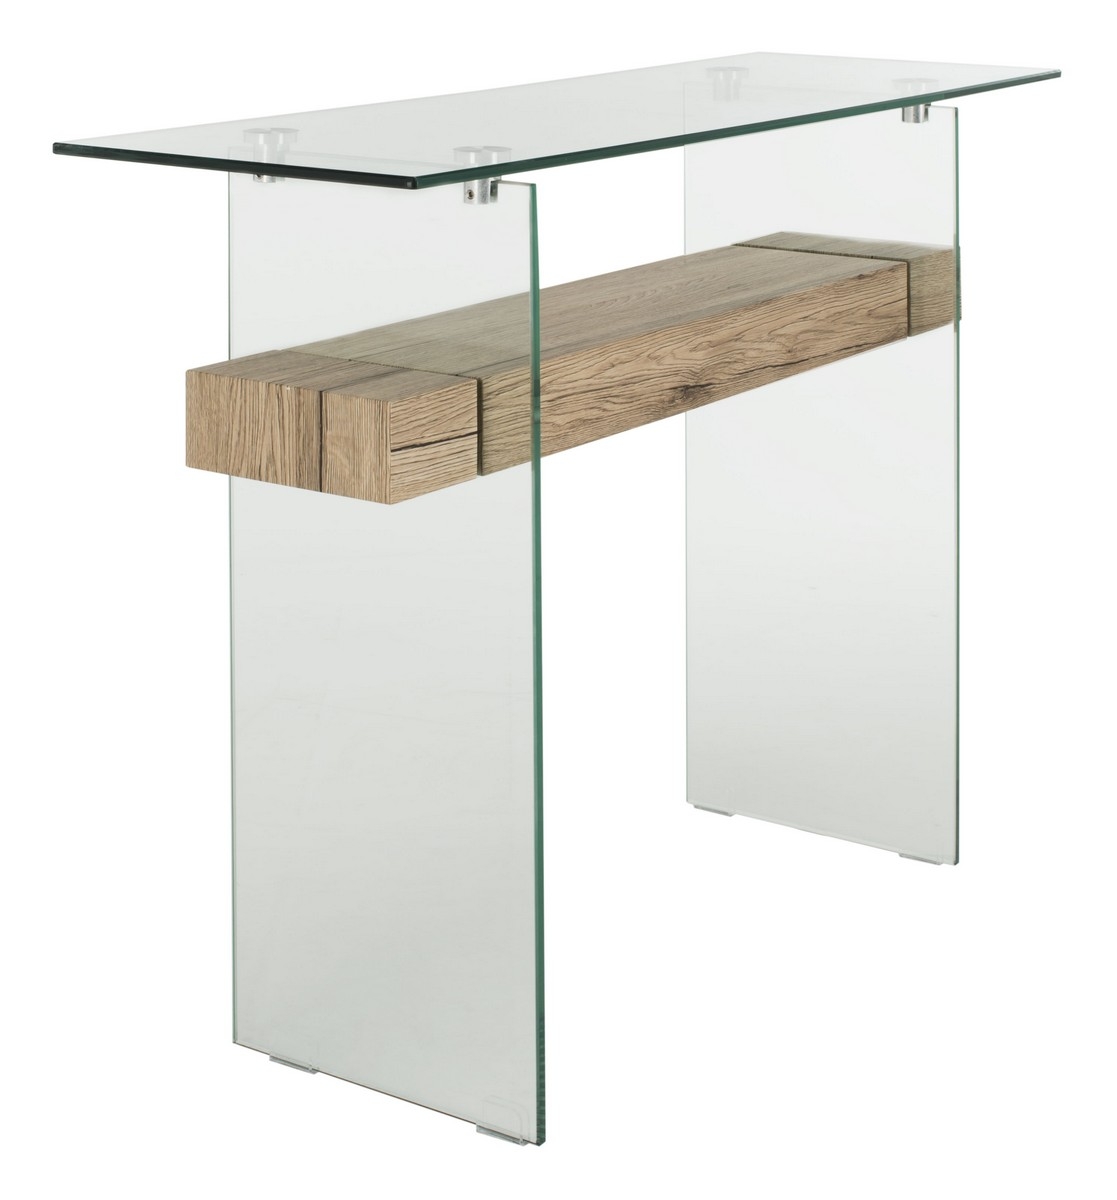 Kayley Console Table - Natural/Glass - Arlo Home - Image 2